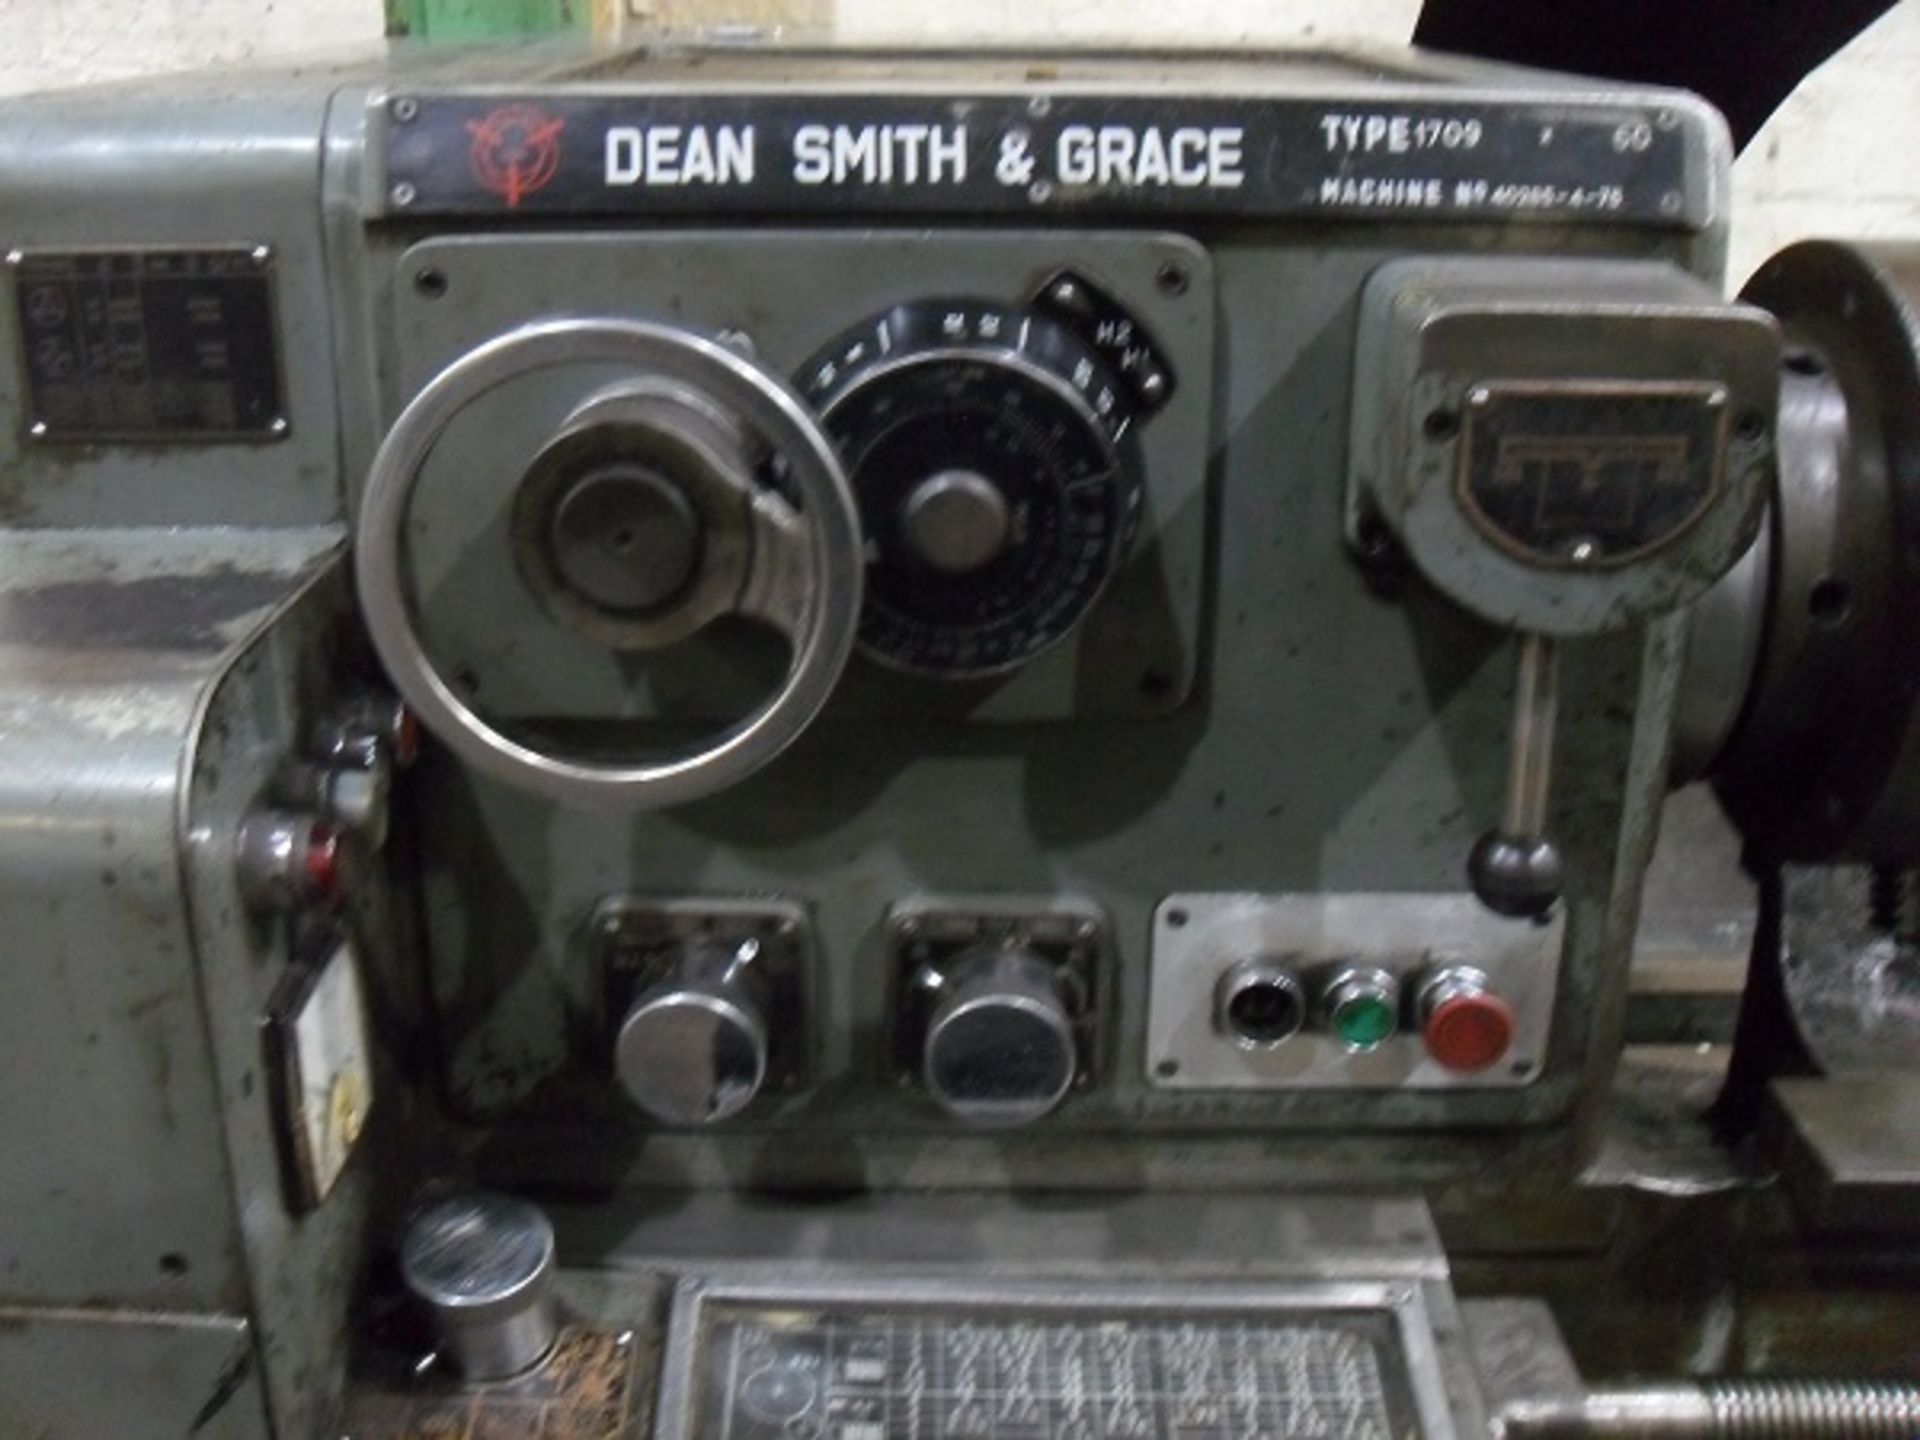 Dean Smith and Grace Type 1709 x 60 Lathe - Image 2 of 6